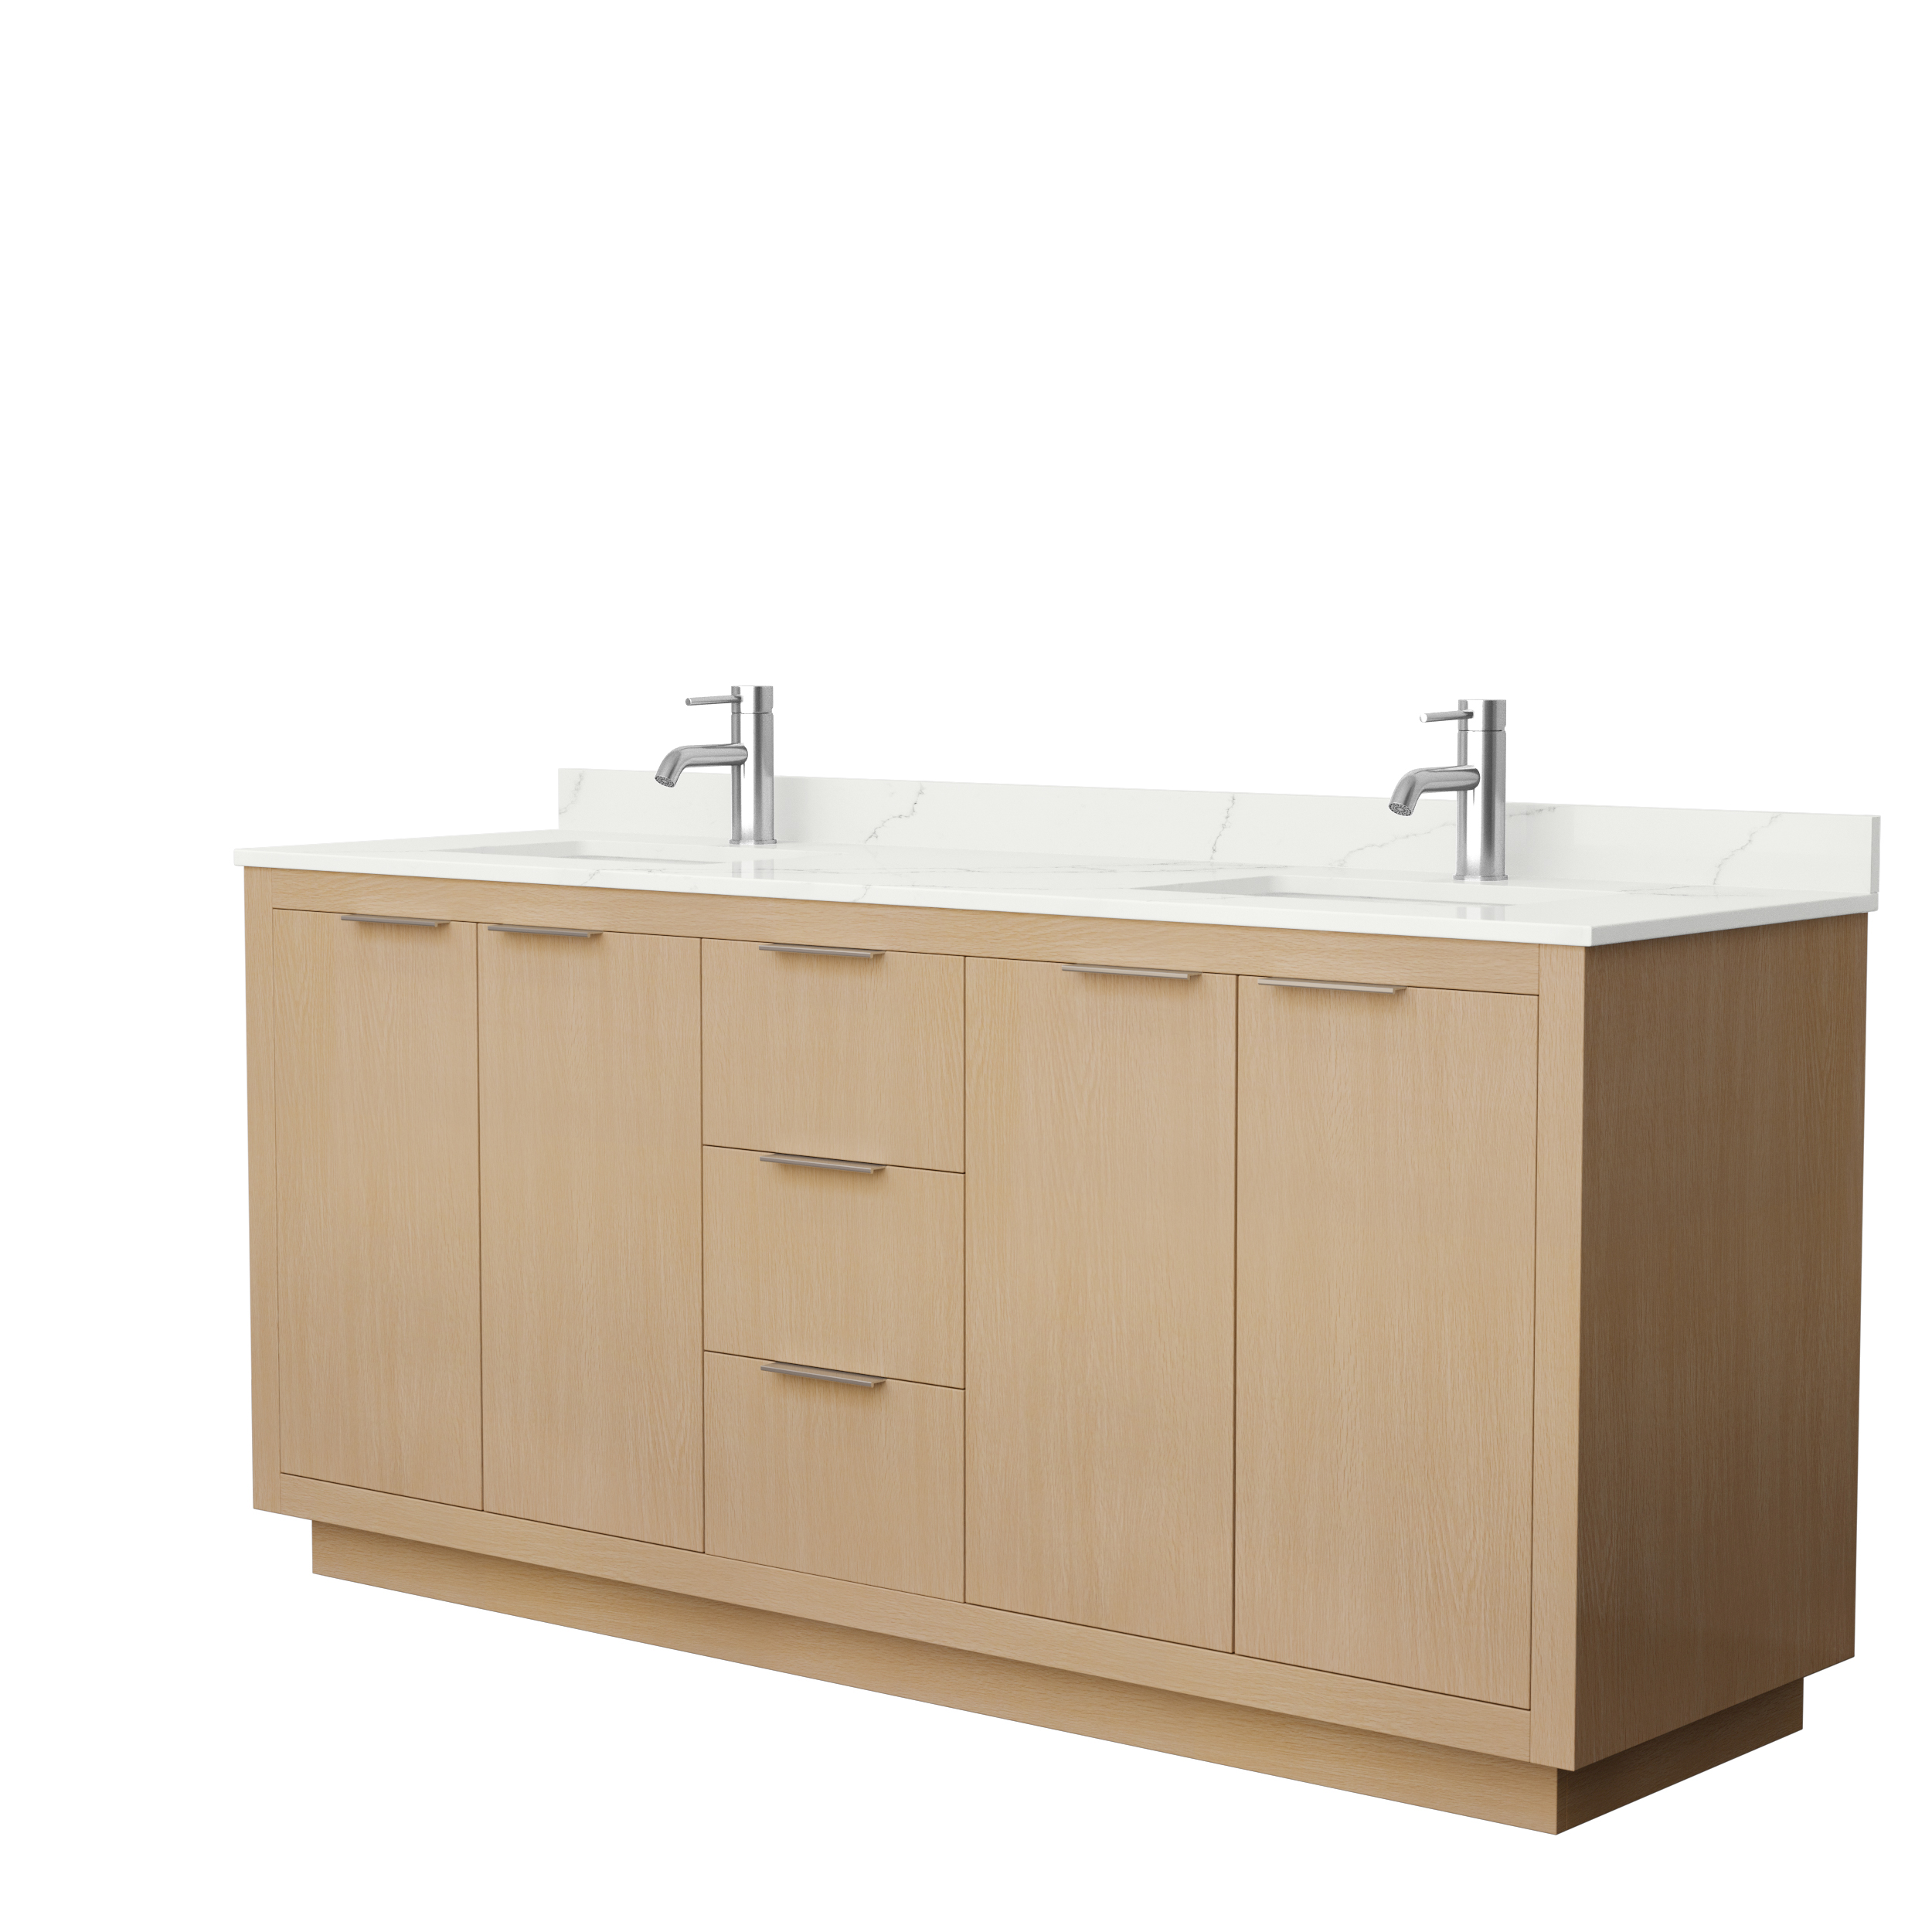 Maroni 72" Double Vanity with optional Quartz or Carrara Marble Counter - Light Straw WC-2828-72-DBL-VAN-LST--